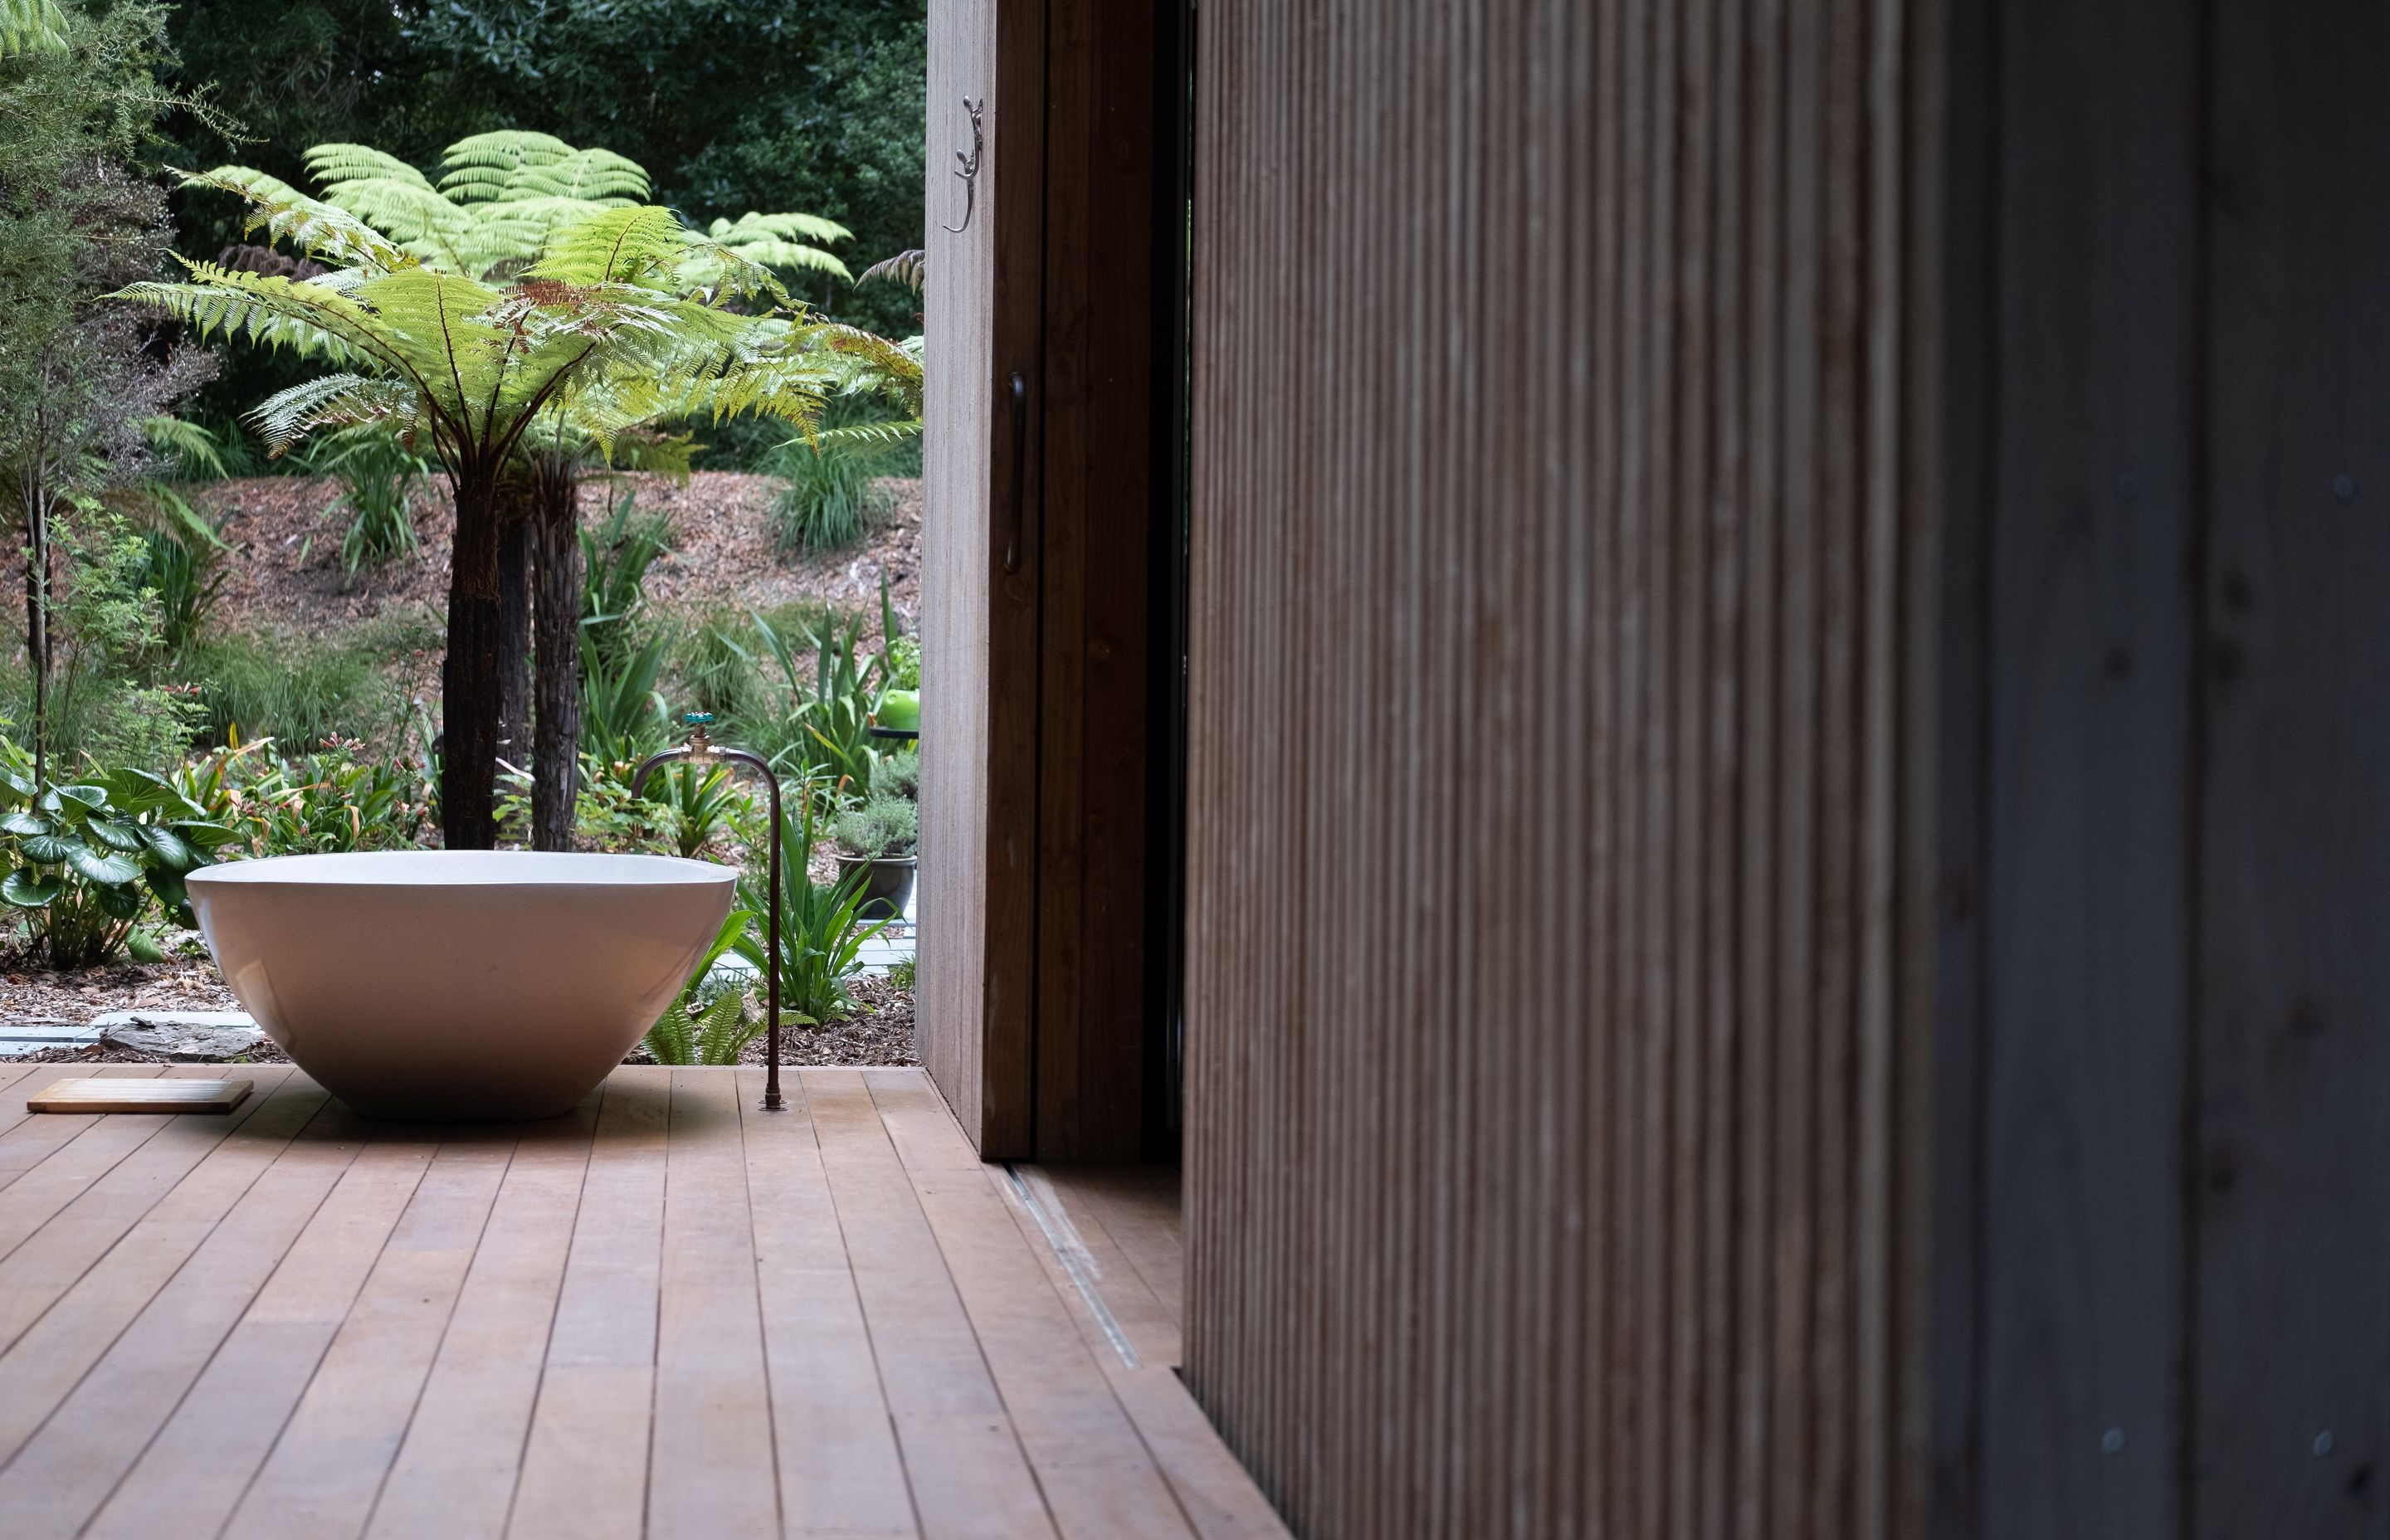 The outdoor bathtub allows guests to soak up the tranquility of the private setting and to commune with nature.